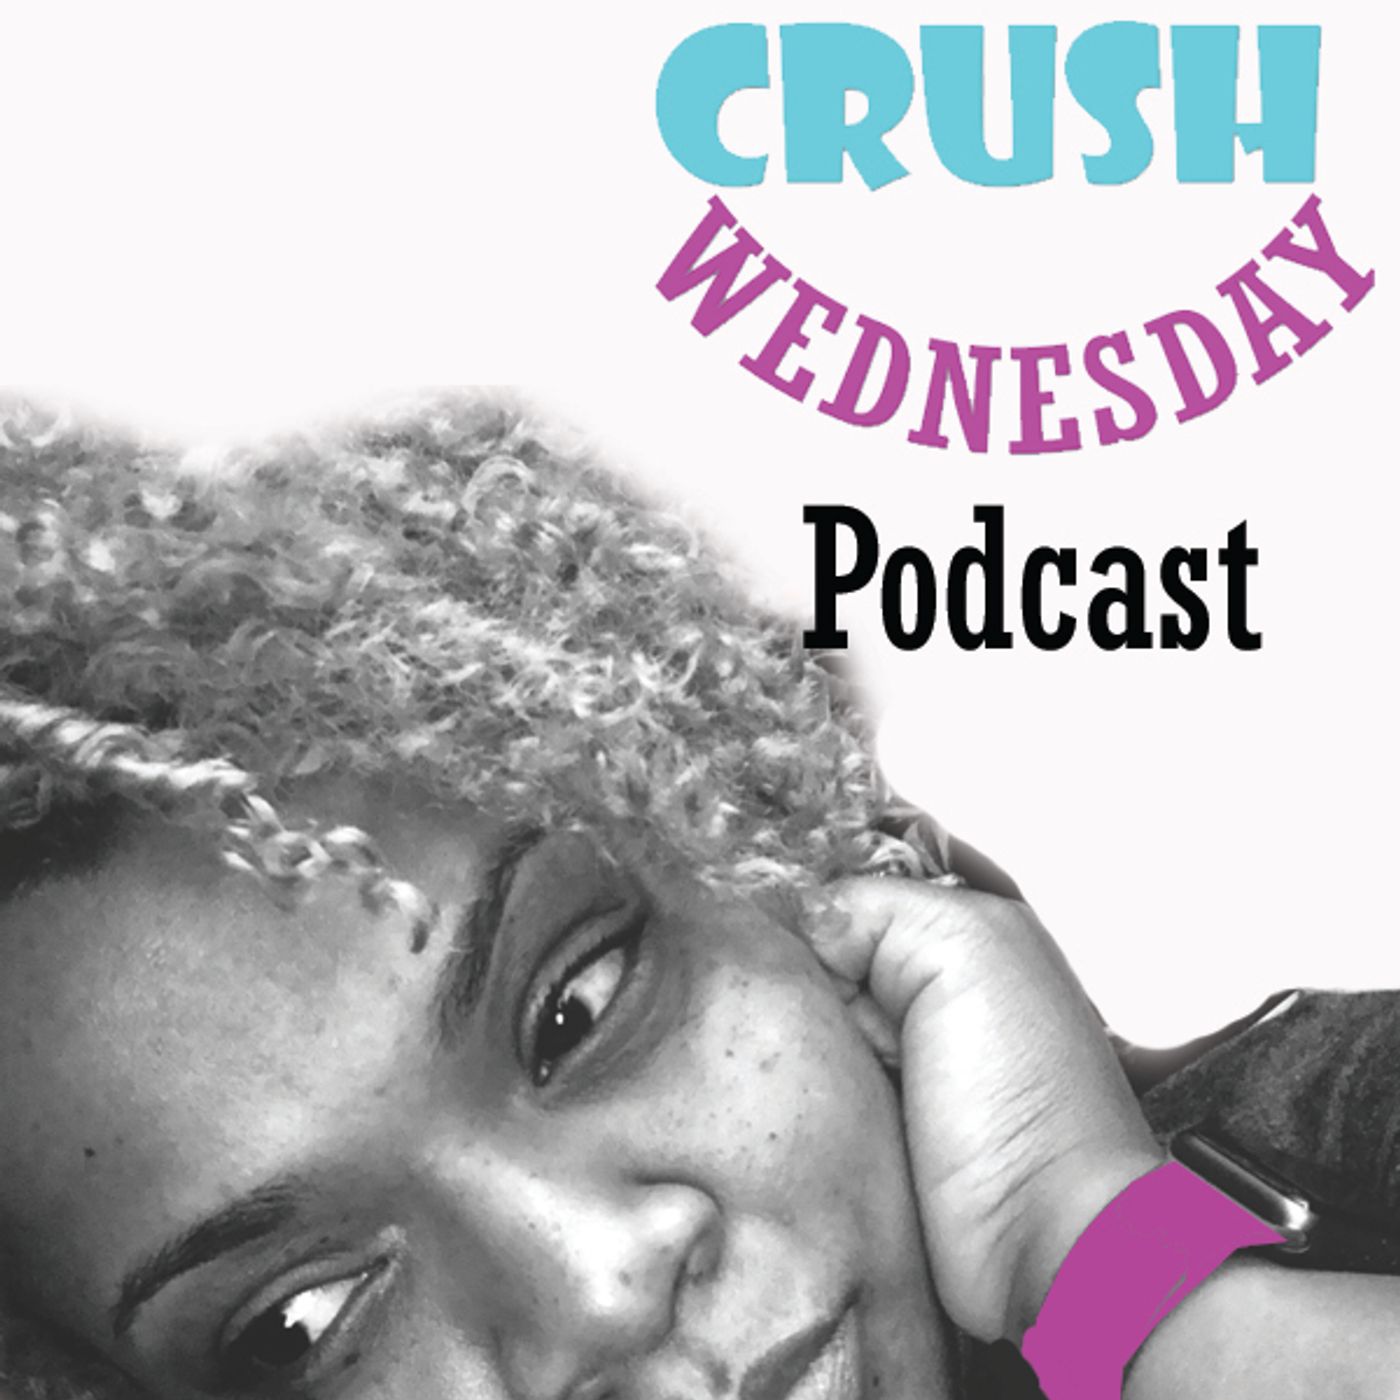 Episode 11 #WCW Compliments